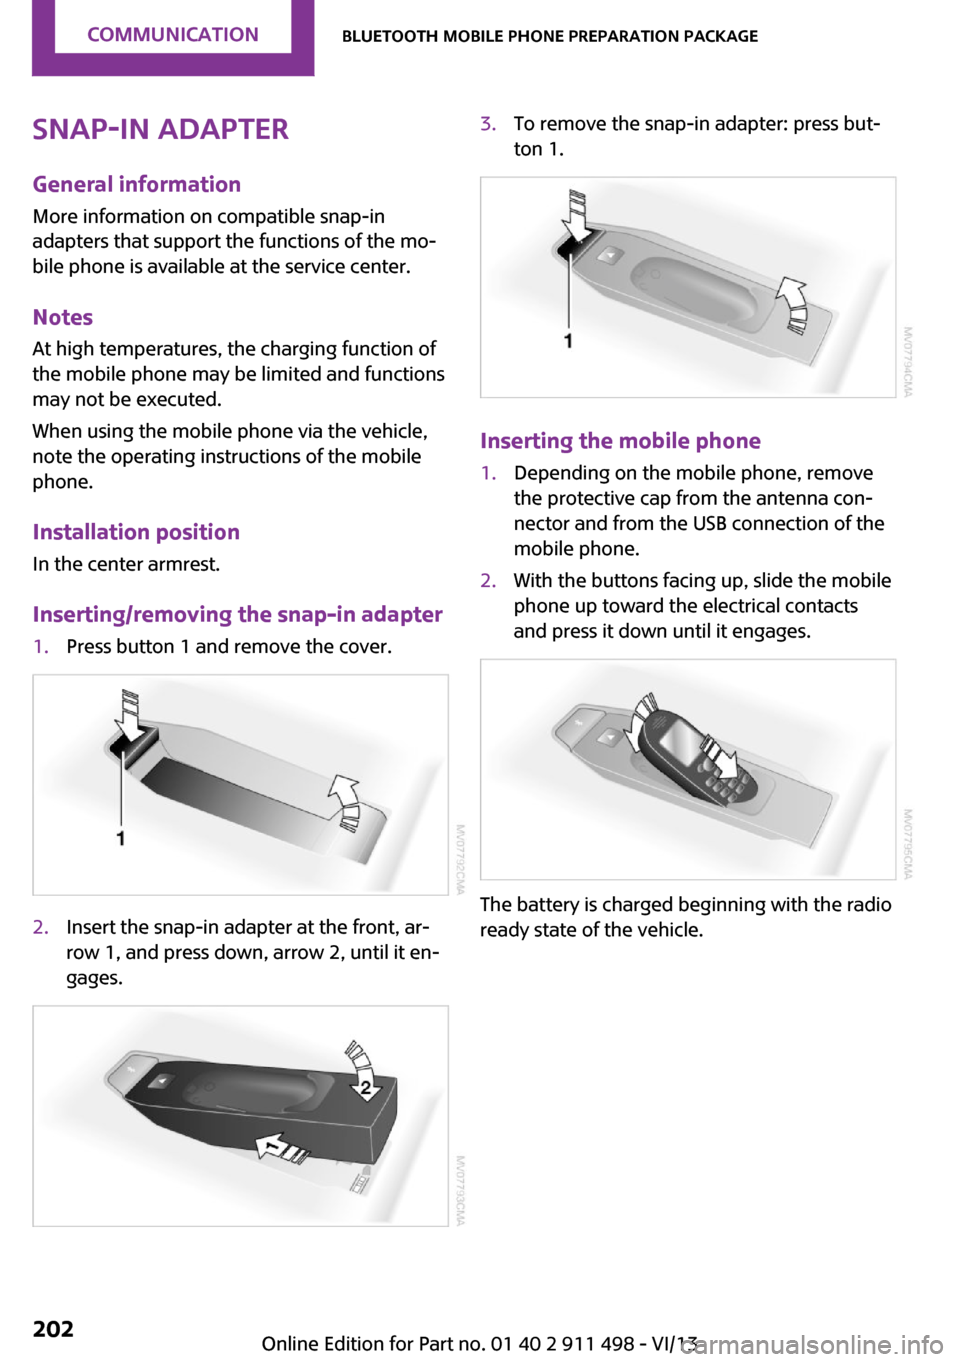 MINI Roadster 2014   (Mini Connected) Owners Guide Snap-in adapter
General information More information on compatible snap-in
adapters that support the functions of the mo‐
bile phone is available at the service center.
Notes At high temperatures, t